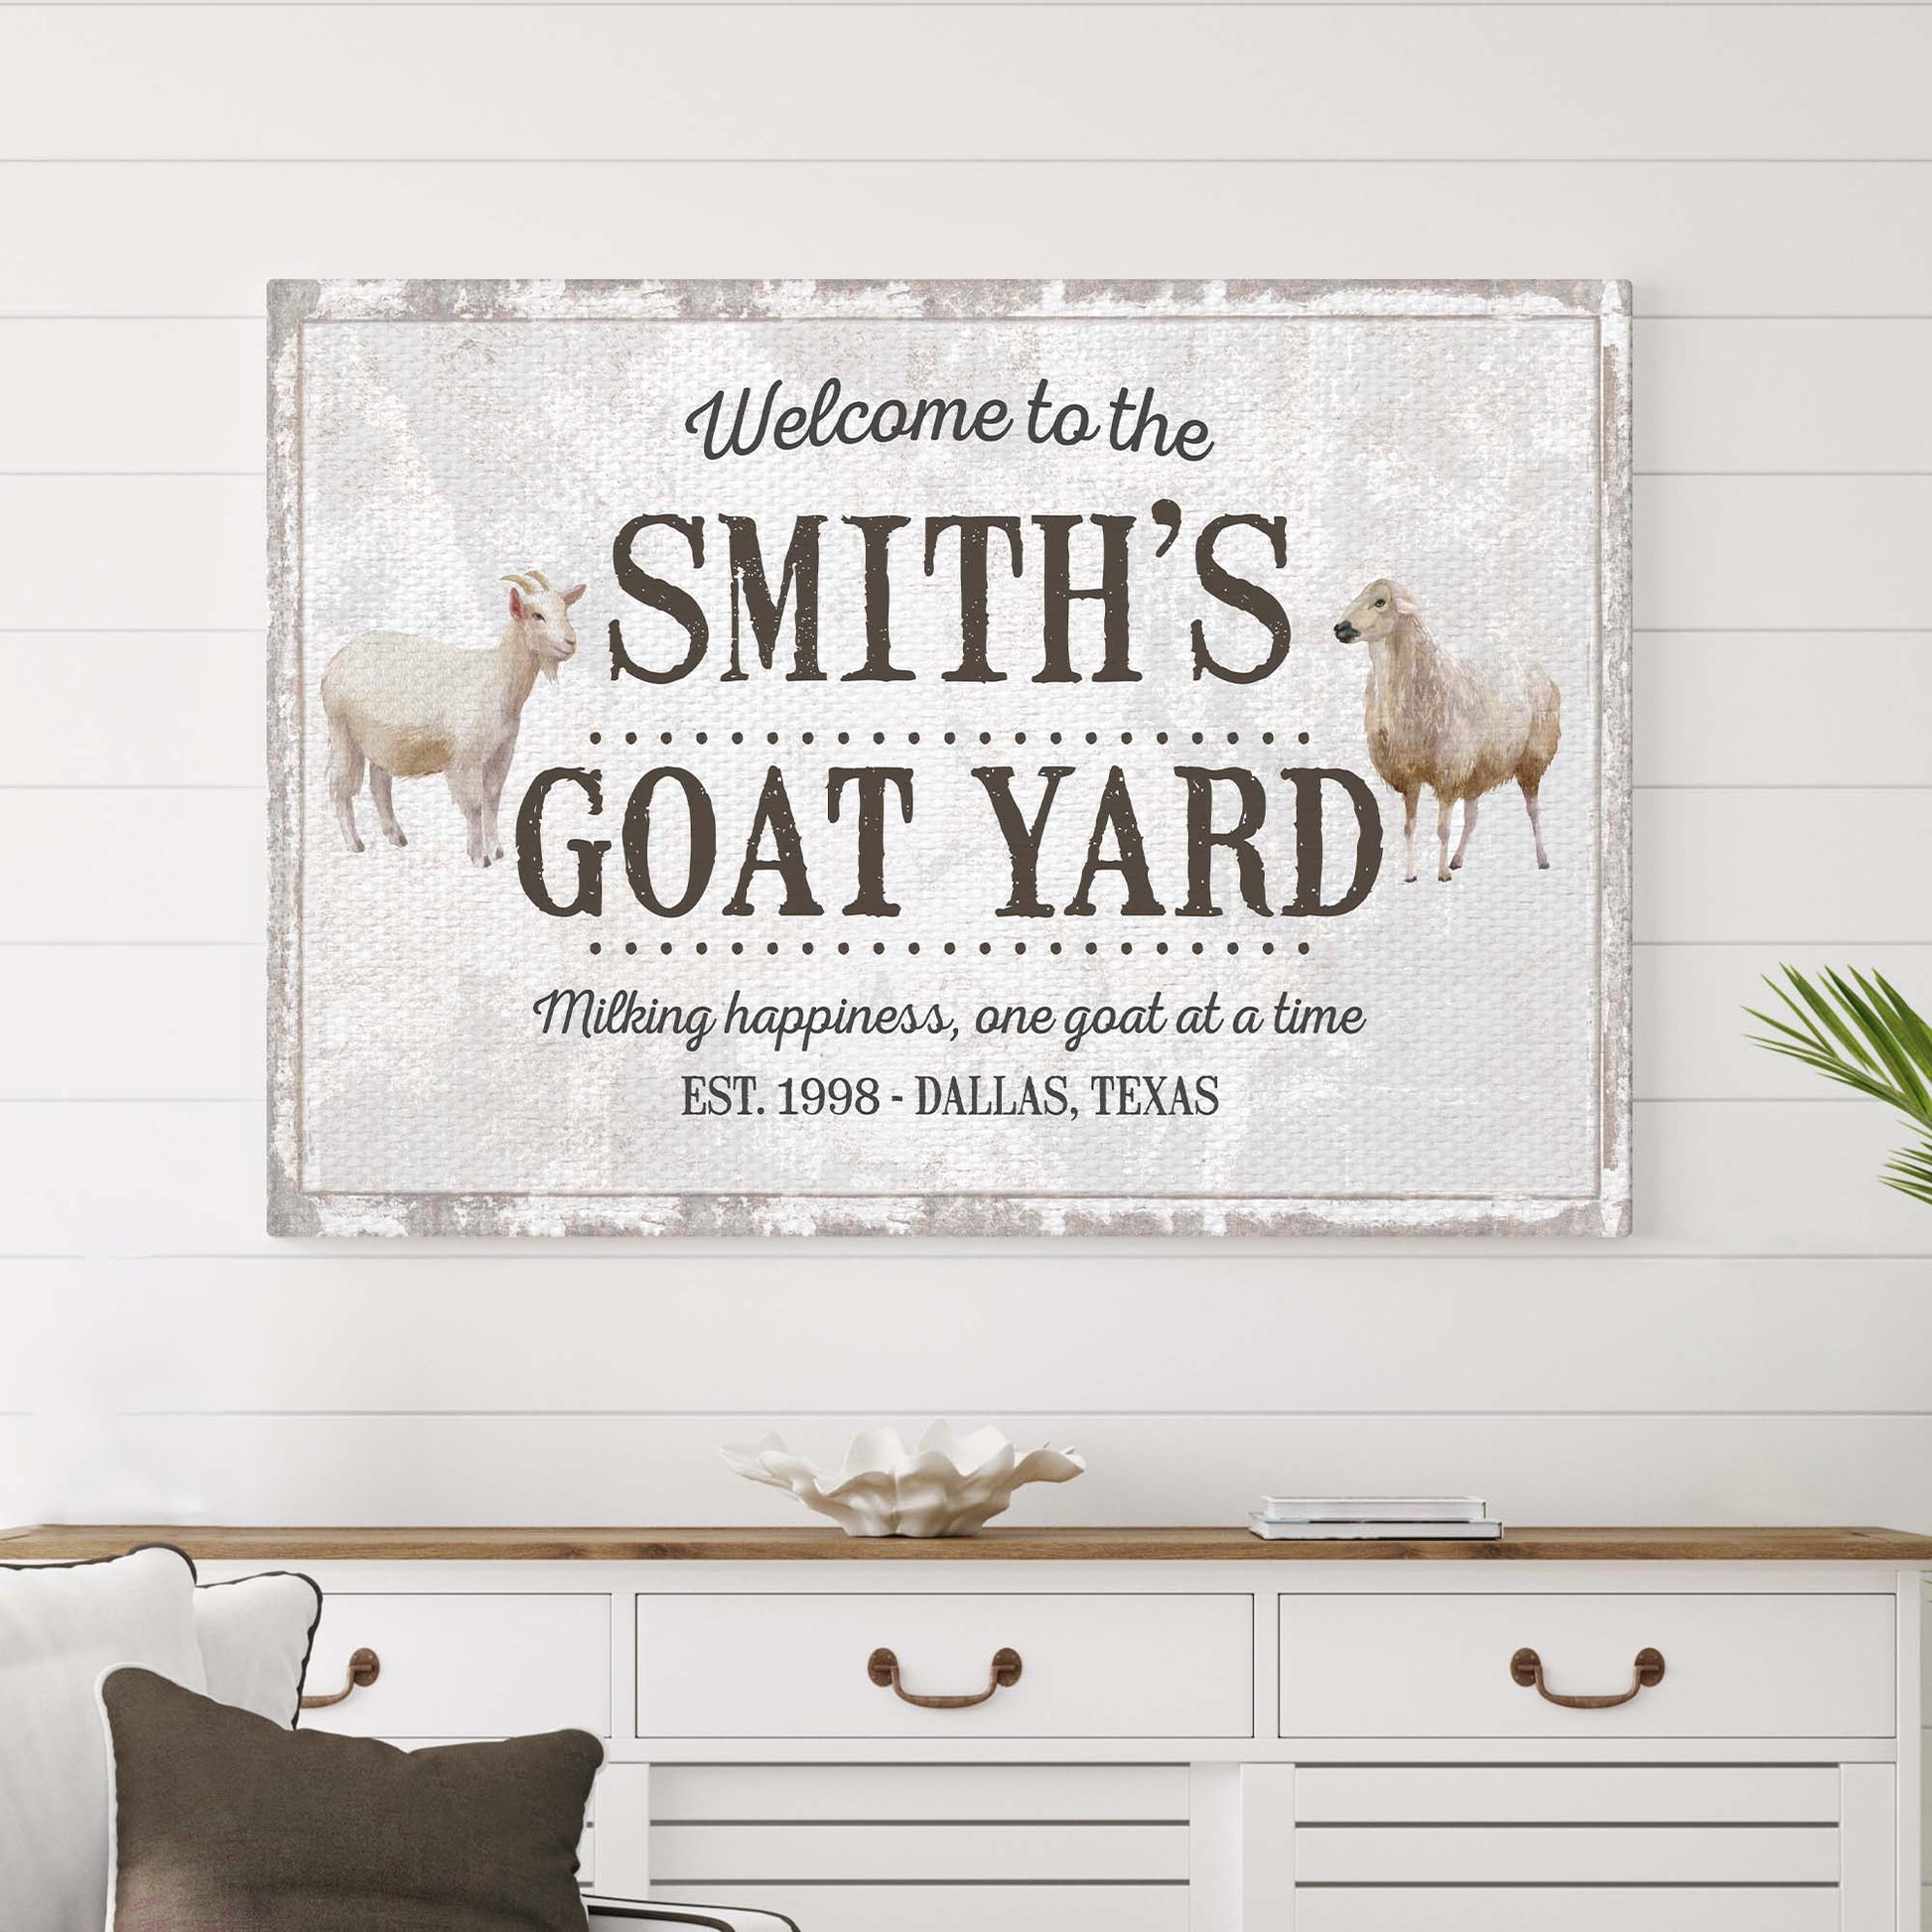 Goat Yard Sign - Image by Tailored Canvases